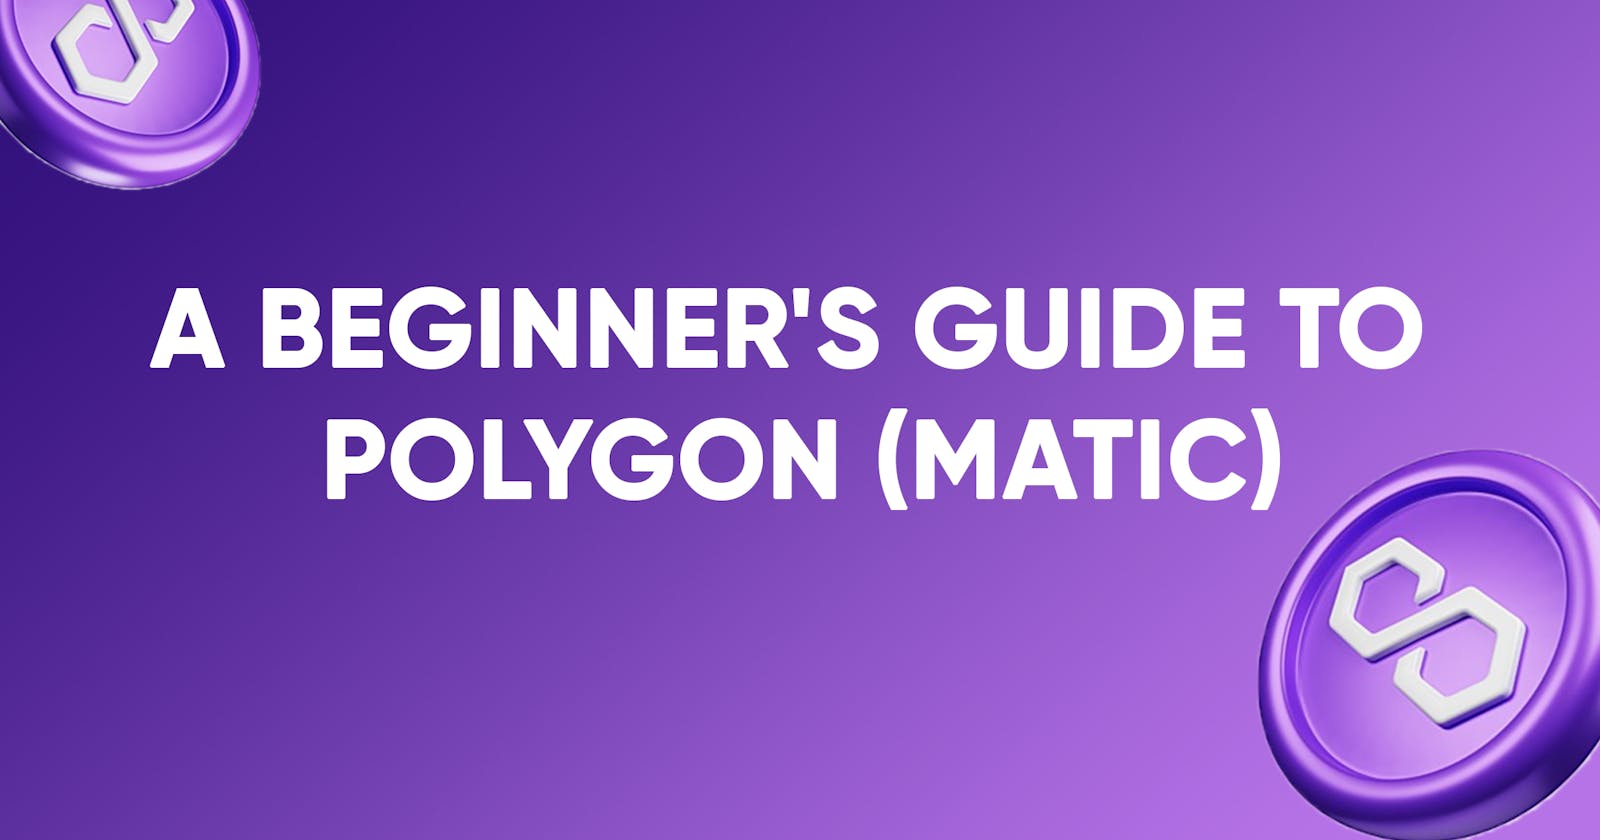 A Beginner's Guide to Polygon (MATIC)